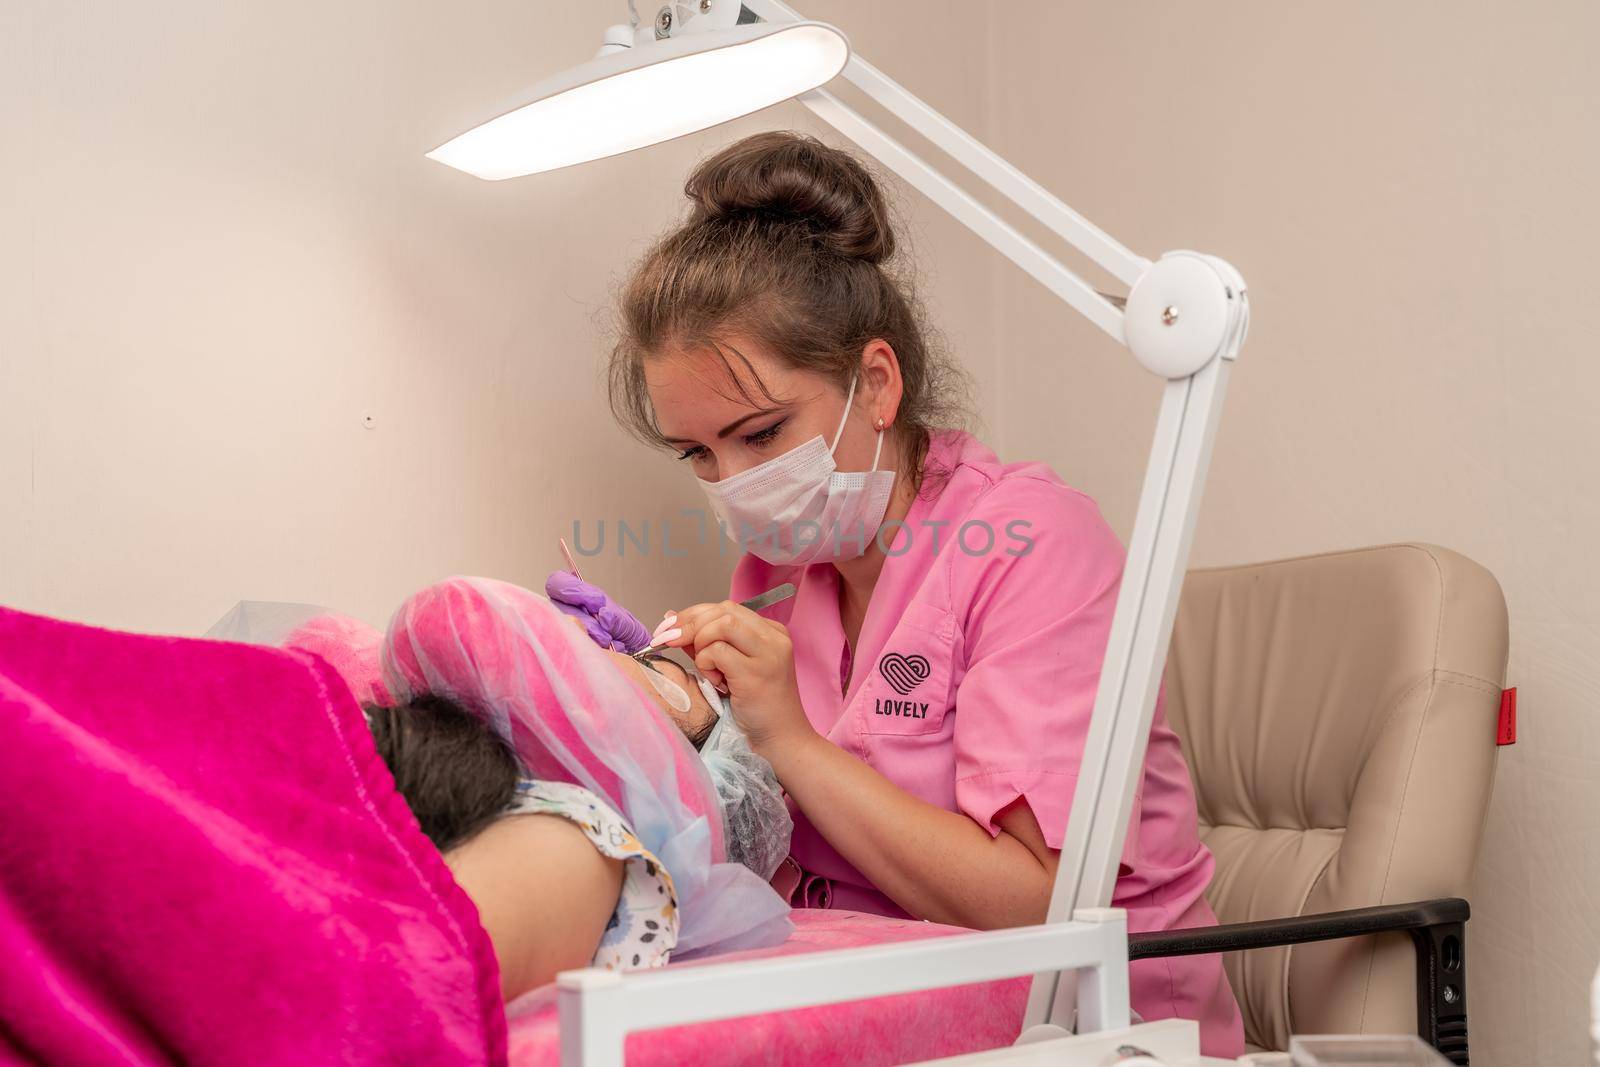 Master lashmaker, diligently extends eyelashes to the client, on the couch, in the beauty salon. A beauty master, a girl of 30 years old, European appearance, at work, in a bright room.